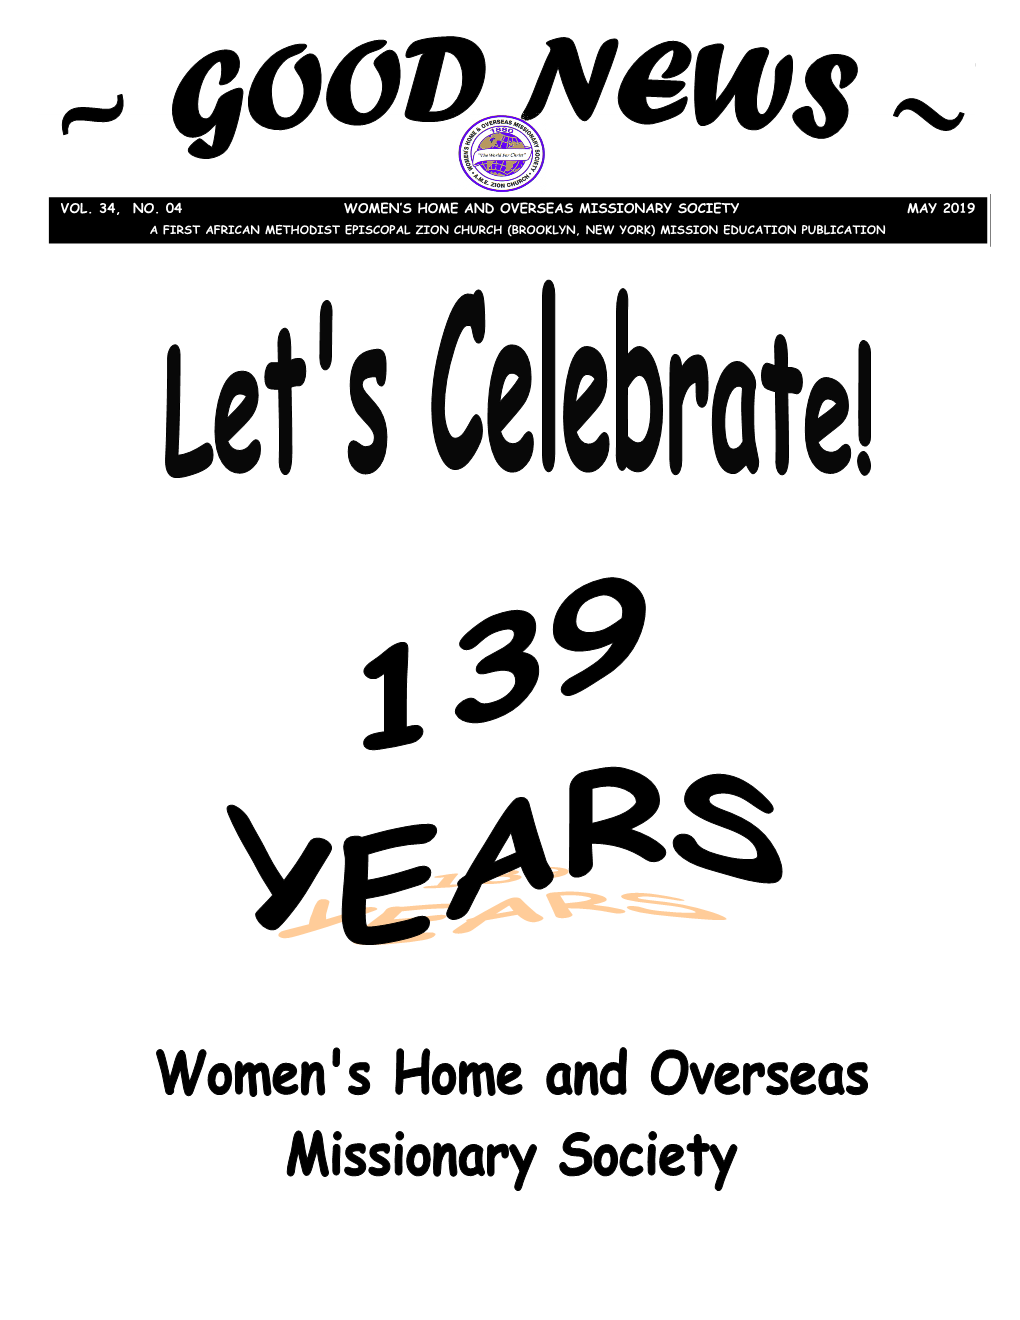 Vol. 34, No. 04 Women's Home and Overseas Missionary